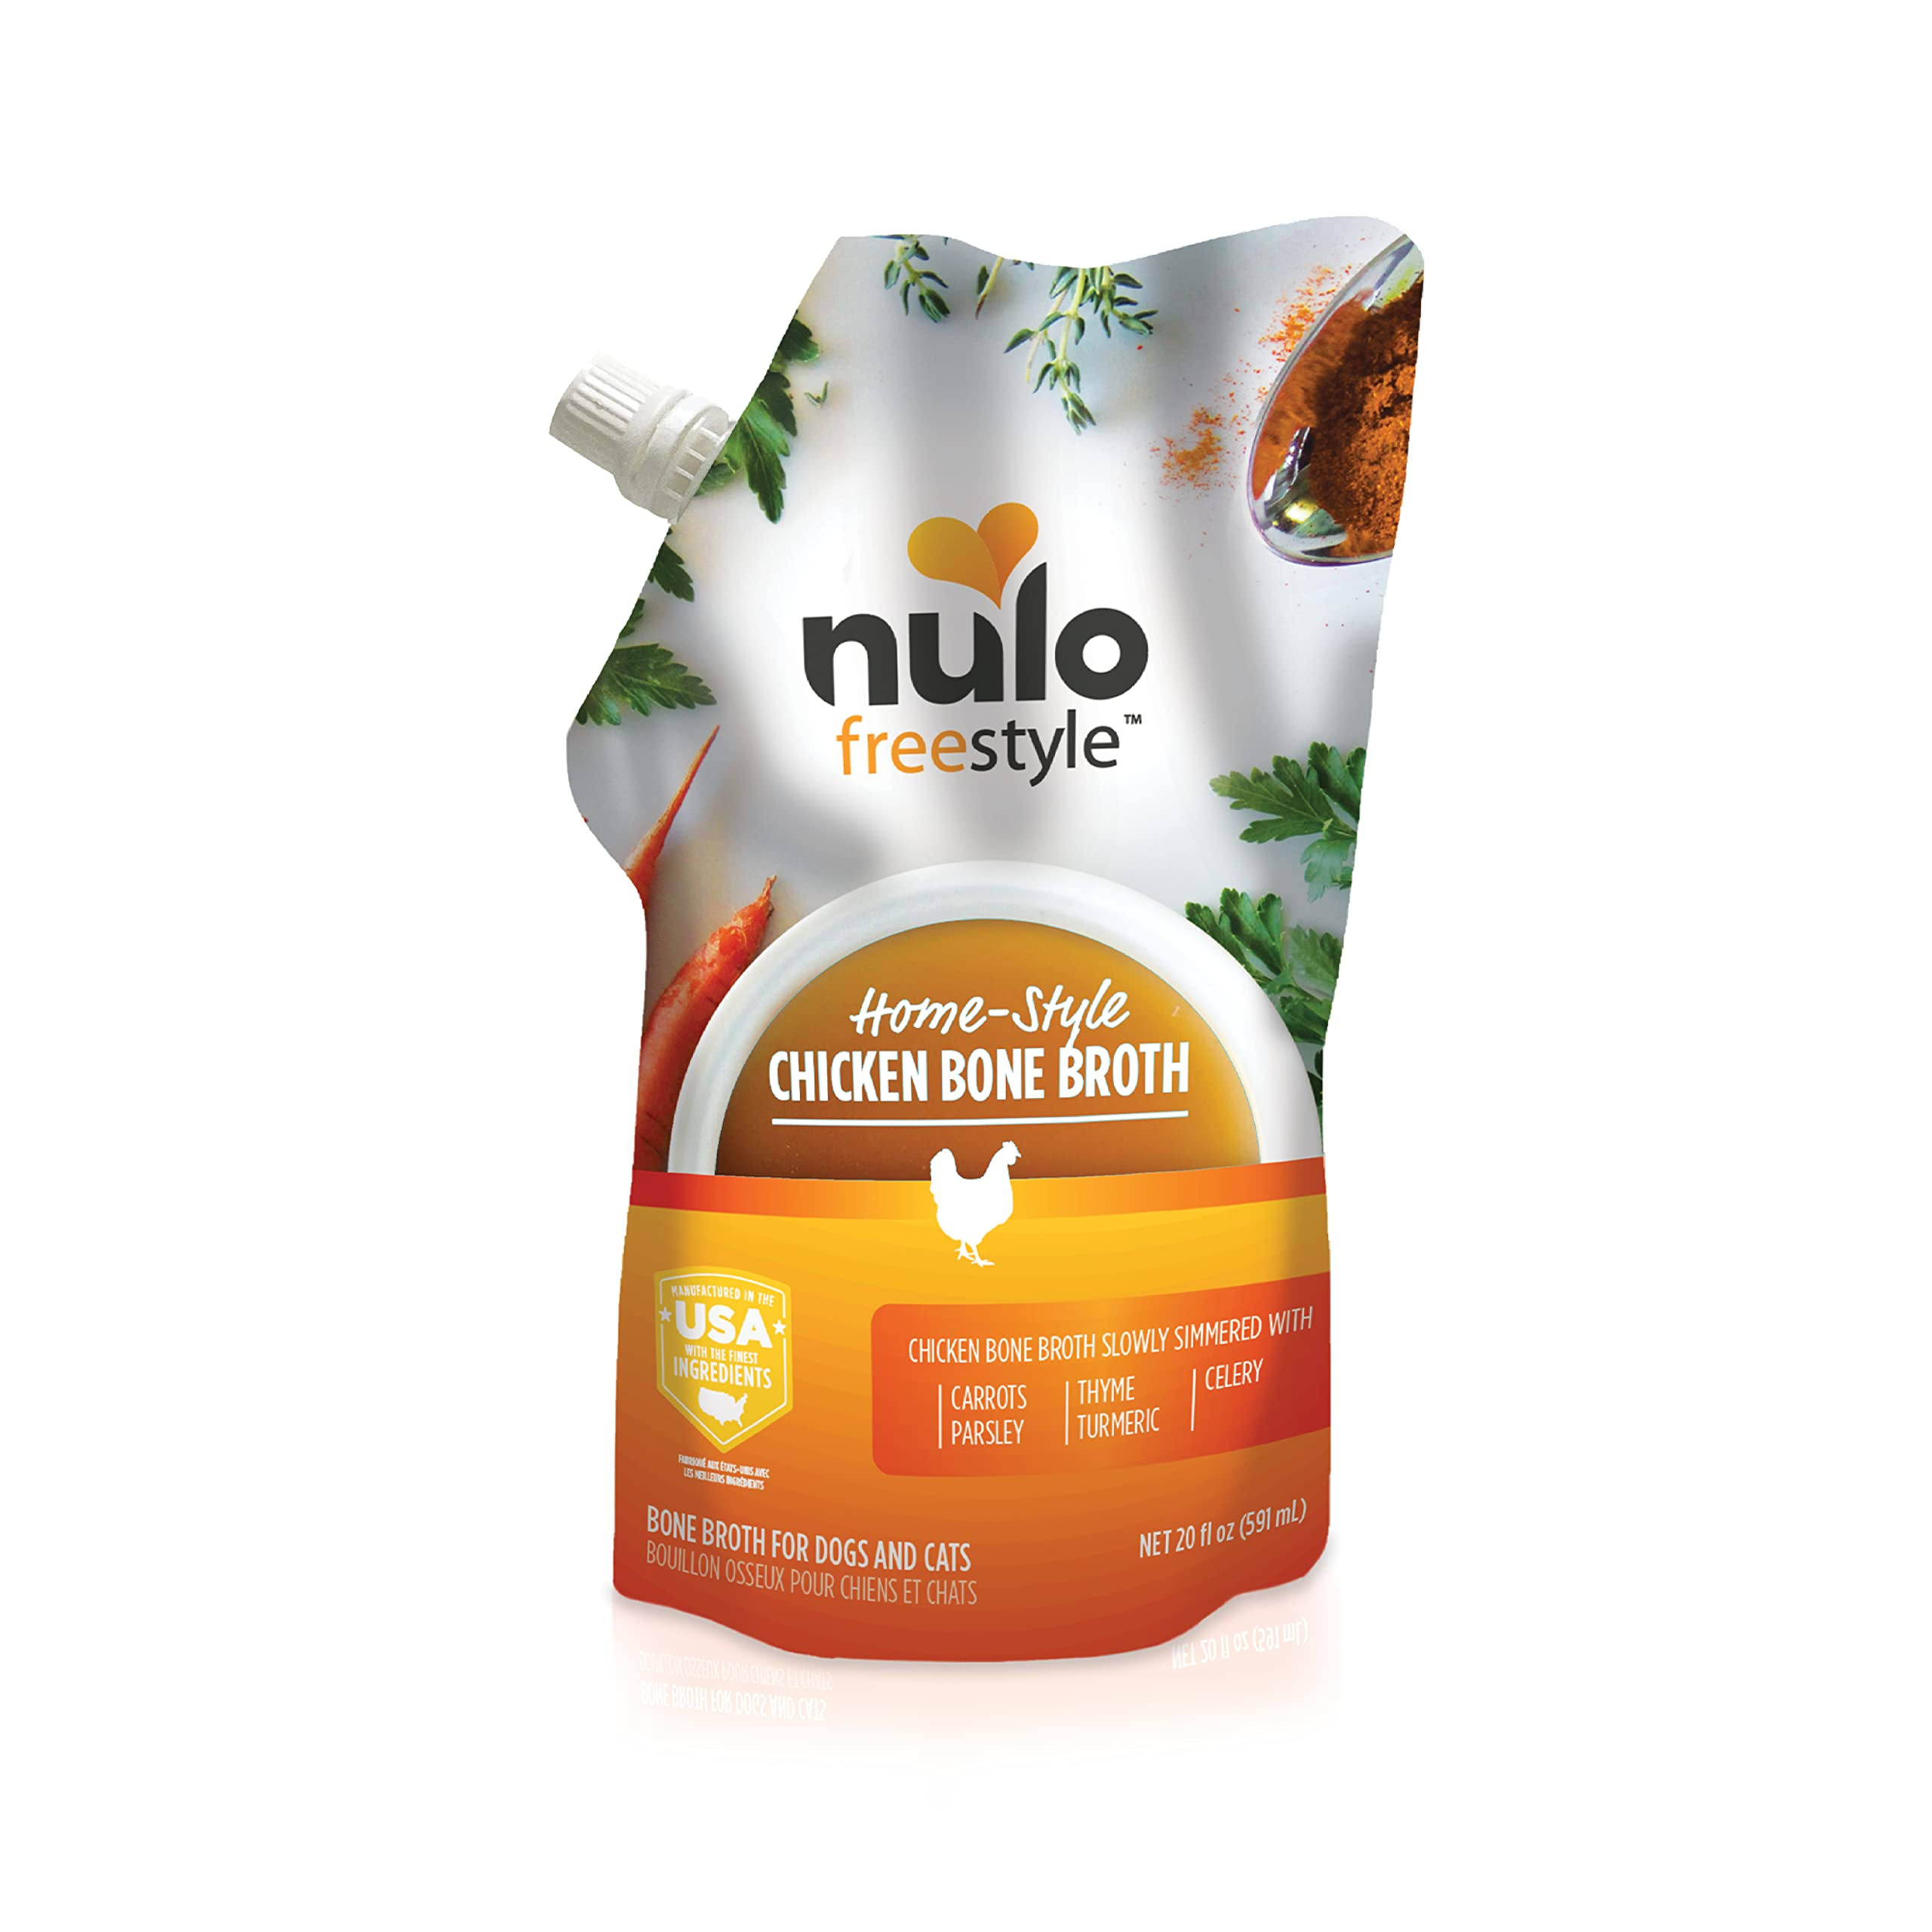 Nulo Freestyle Bone Broth, Premium Food Topper For Cats And Dogs, With Collagen And Chondroitin Sulfate To Help Boost The Quality Of Your Pet’s Coat